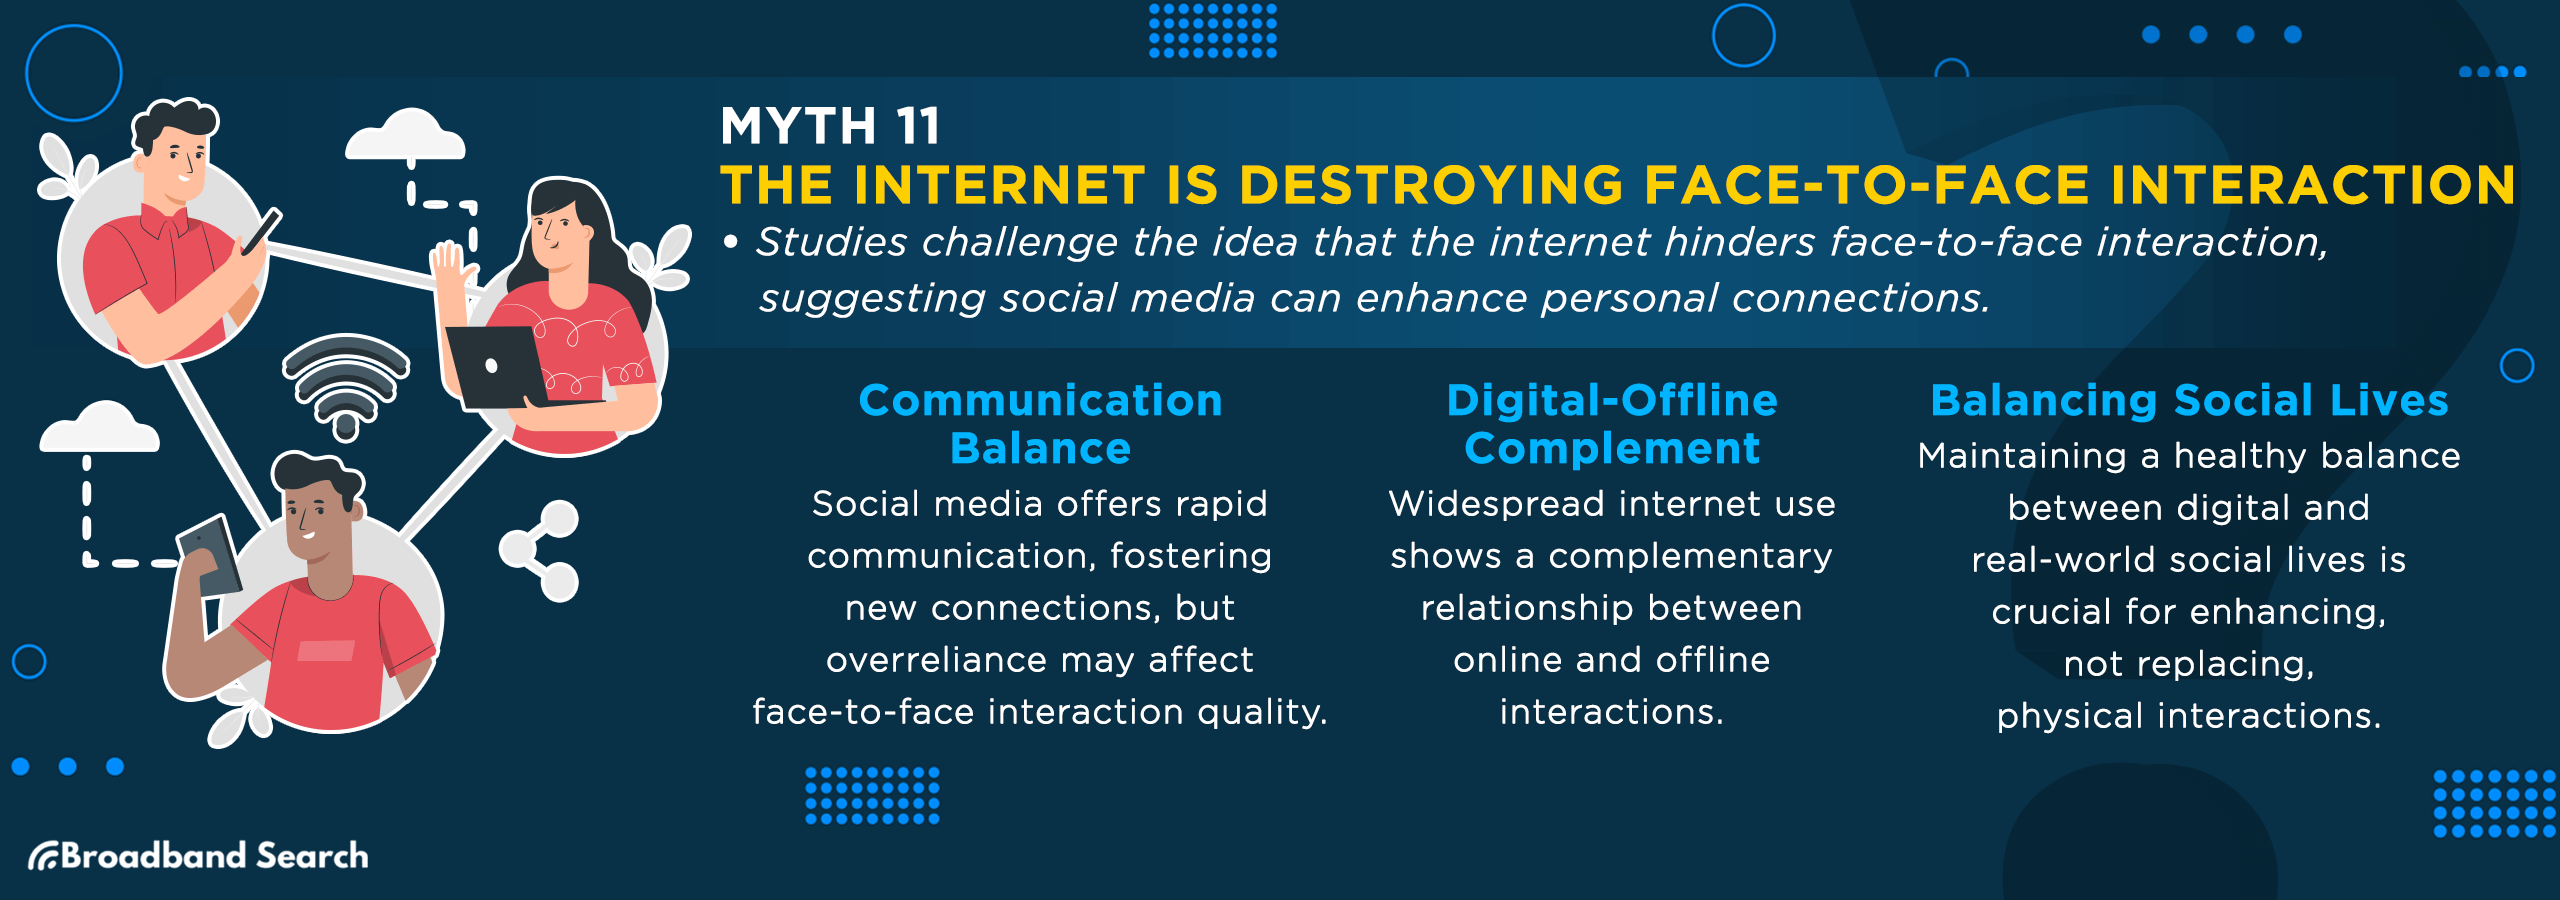 eleventh internet myth, the internet is destroying face to face interaction